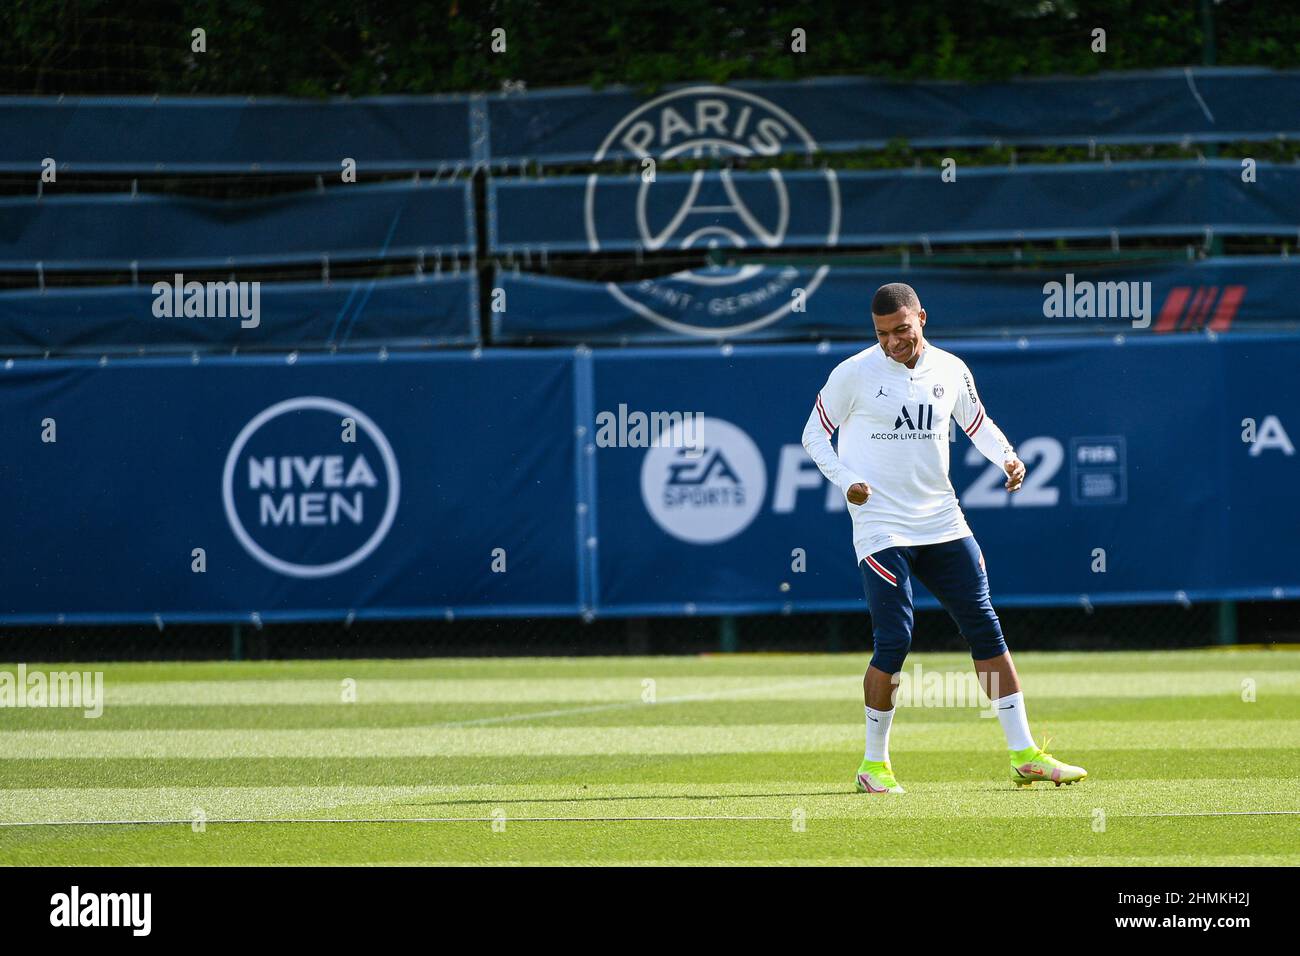 Kylian Mbappe of PSG during a training session at the Camp des Loges Paris Saint-Germain football club's training ground in Saint-Germain-en-Laye, nea Stock Photo